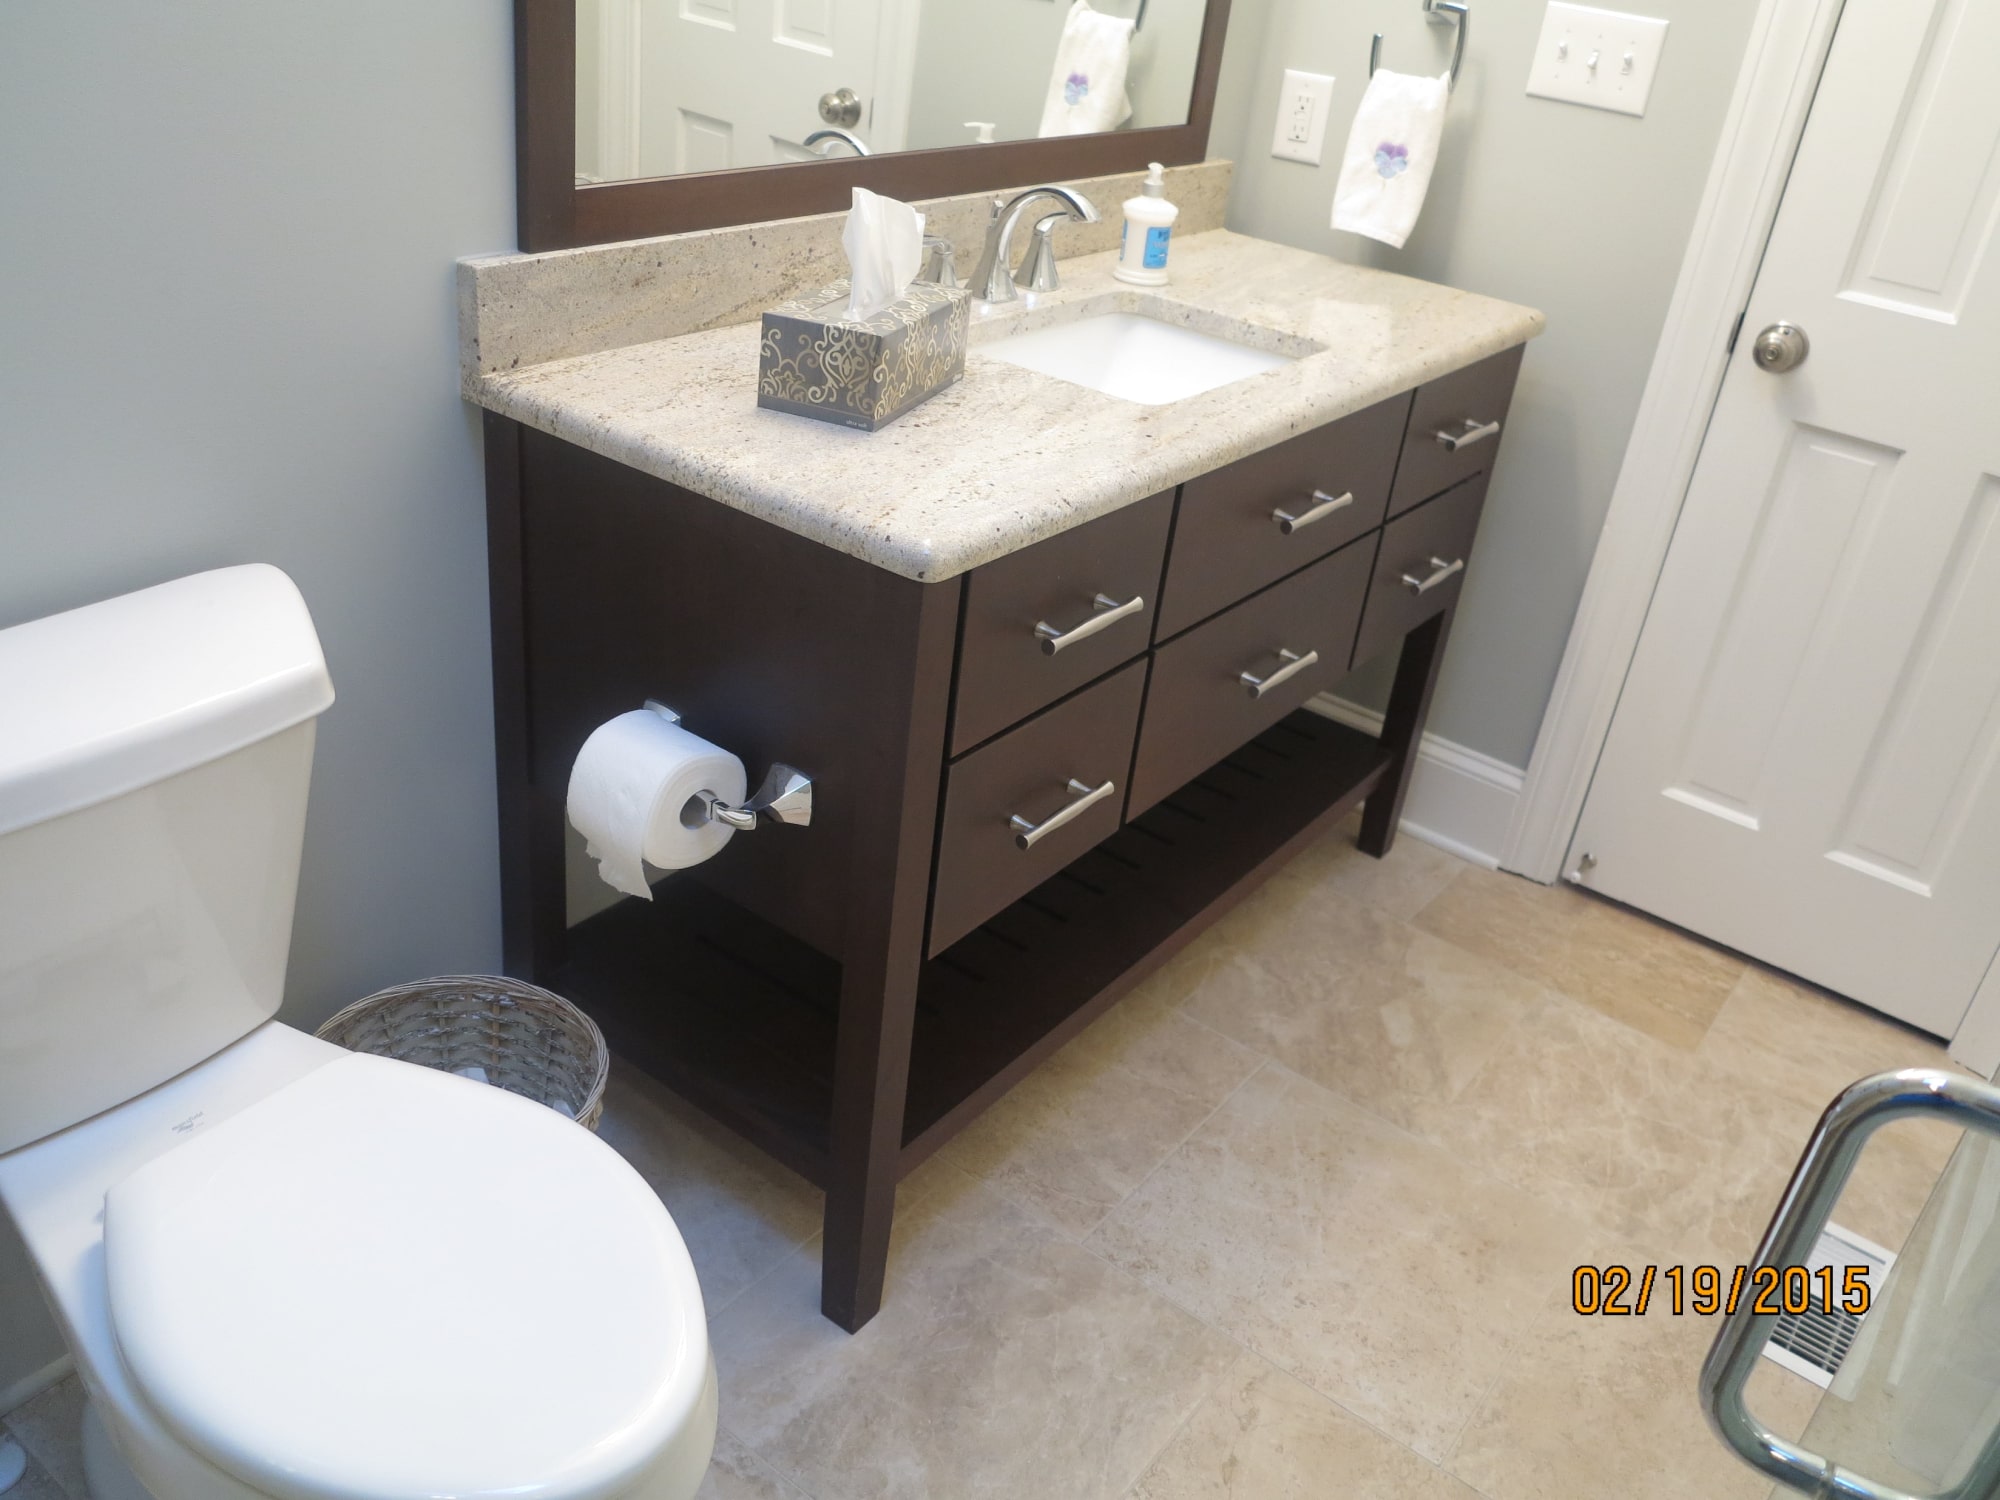 New Vanity From Showplace Wood Products In Downstairs Guest Bathroom